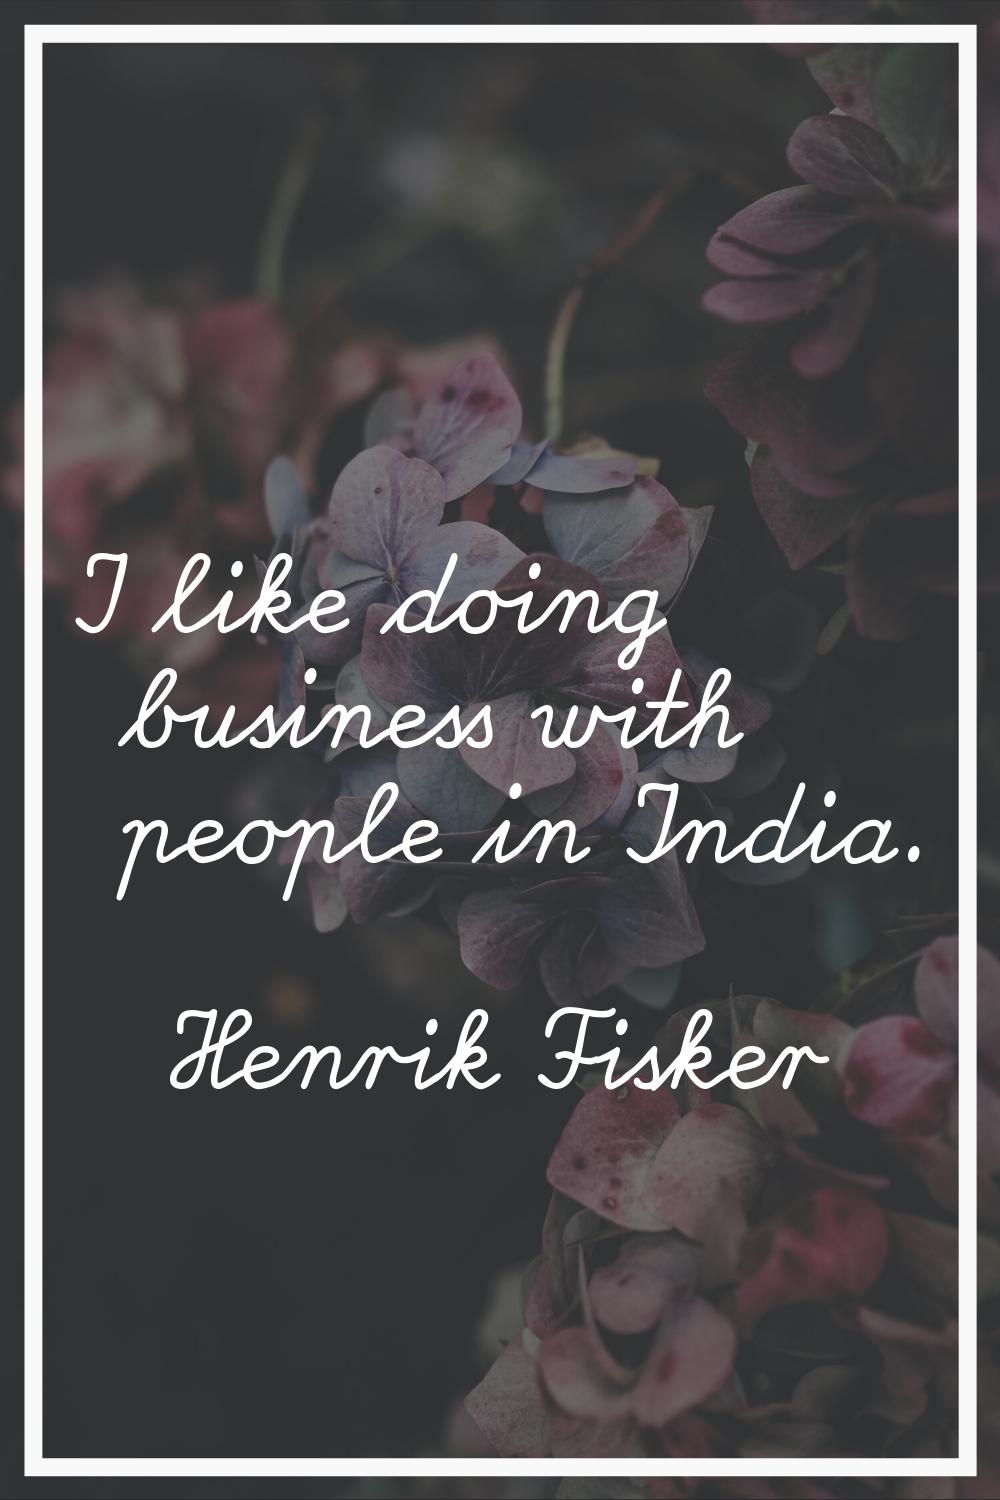 I like doing business with people in India.